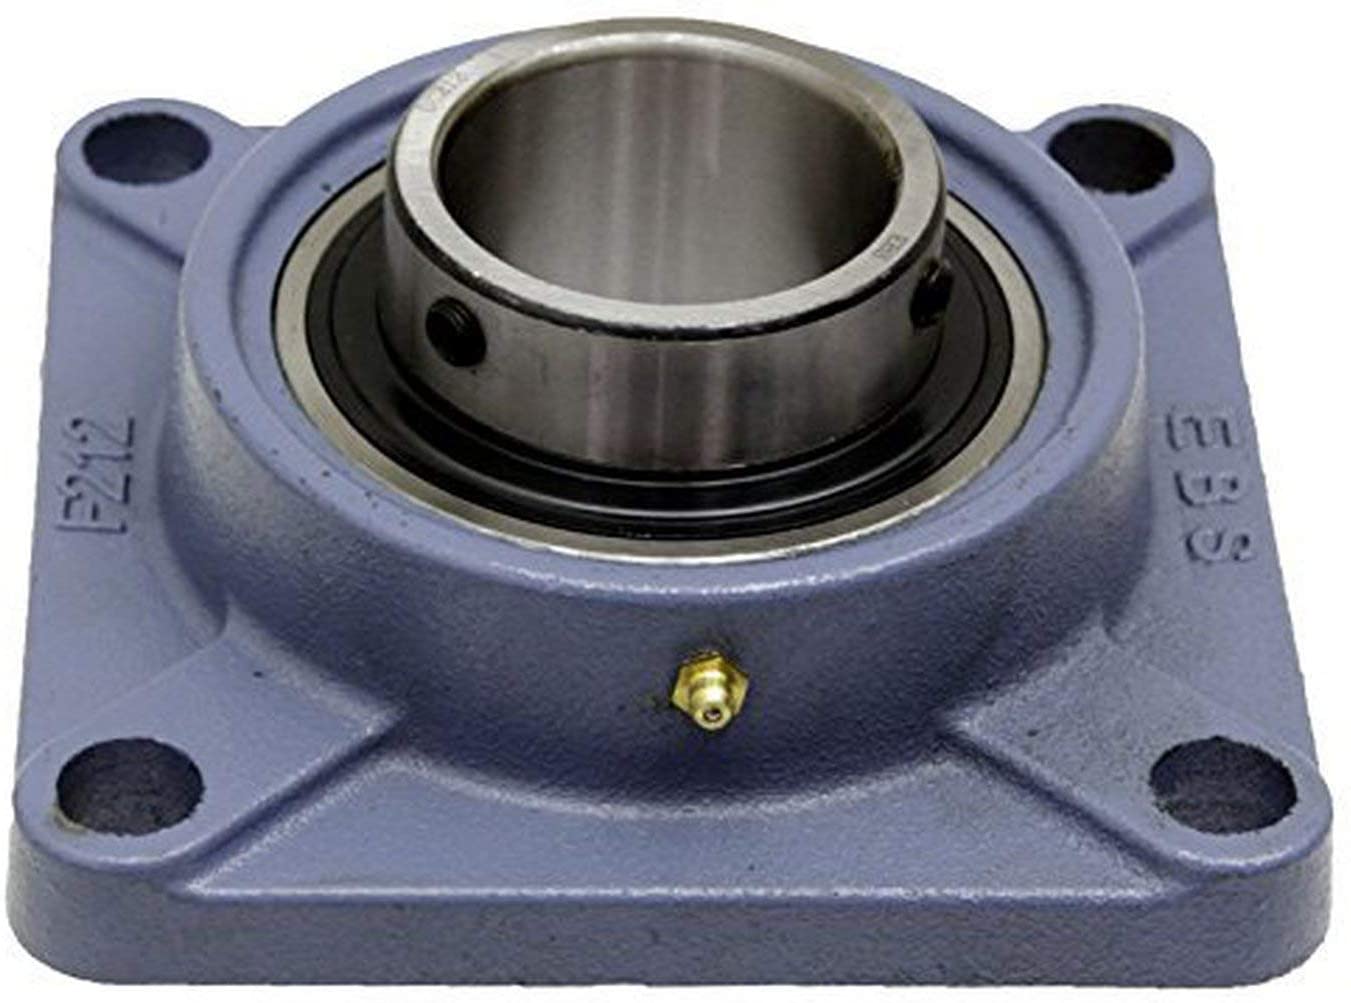 UCF212-36  GENERIC Normal duty 4 bolt cast iron flange self-lube housed unit - Imperial Thumbnail